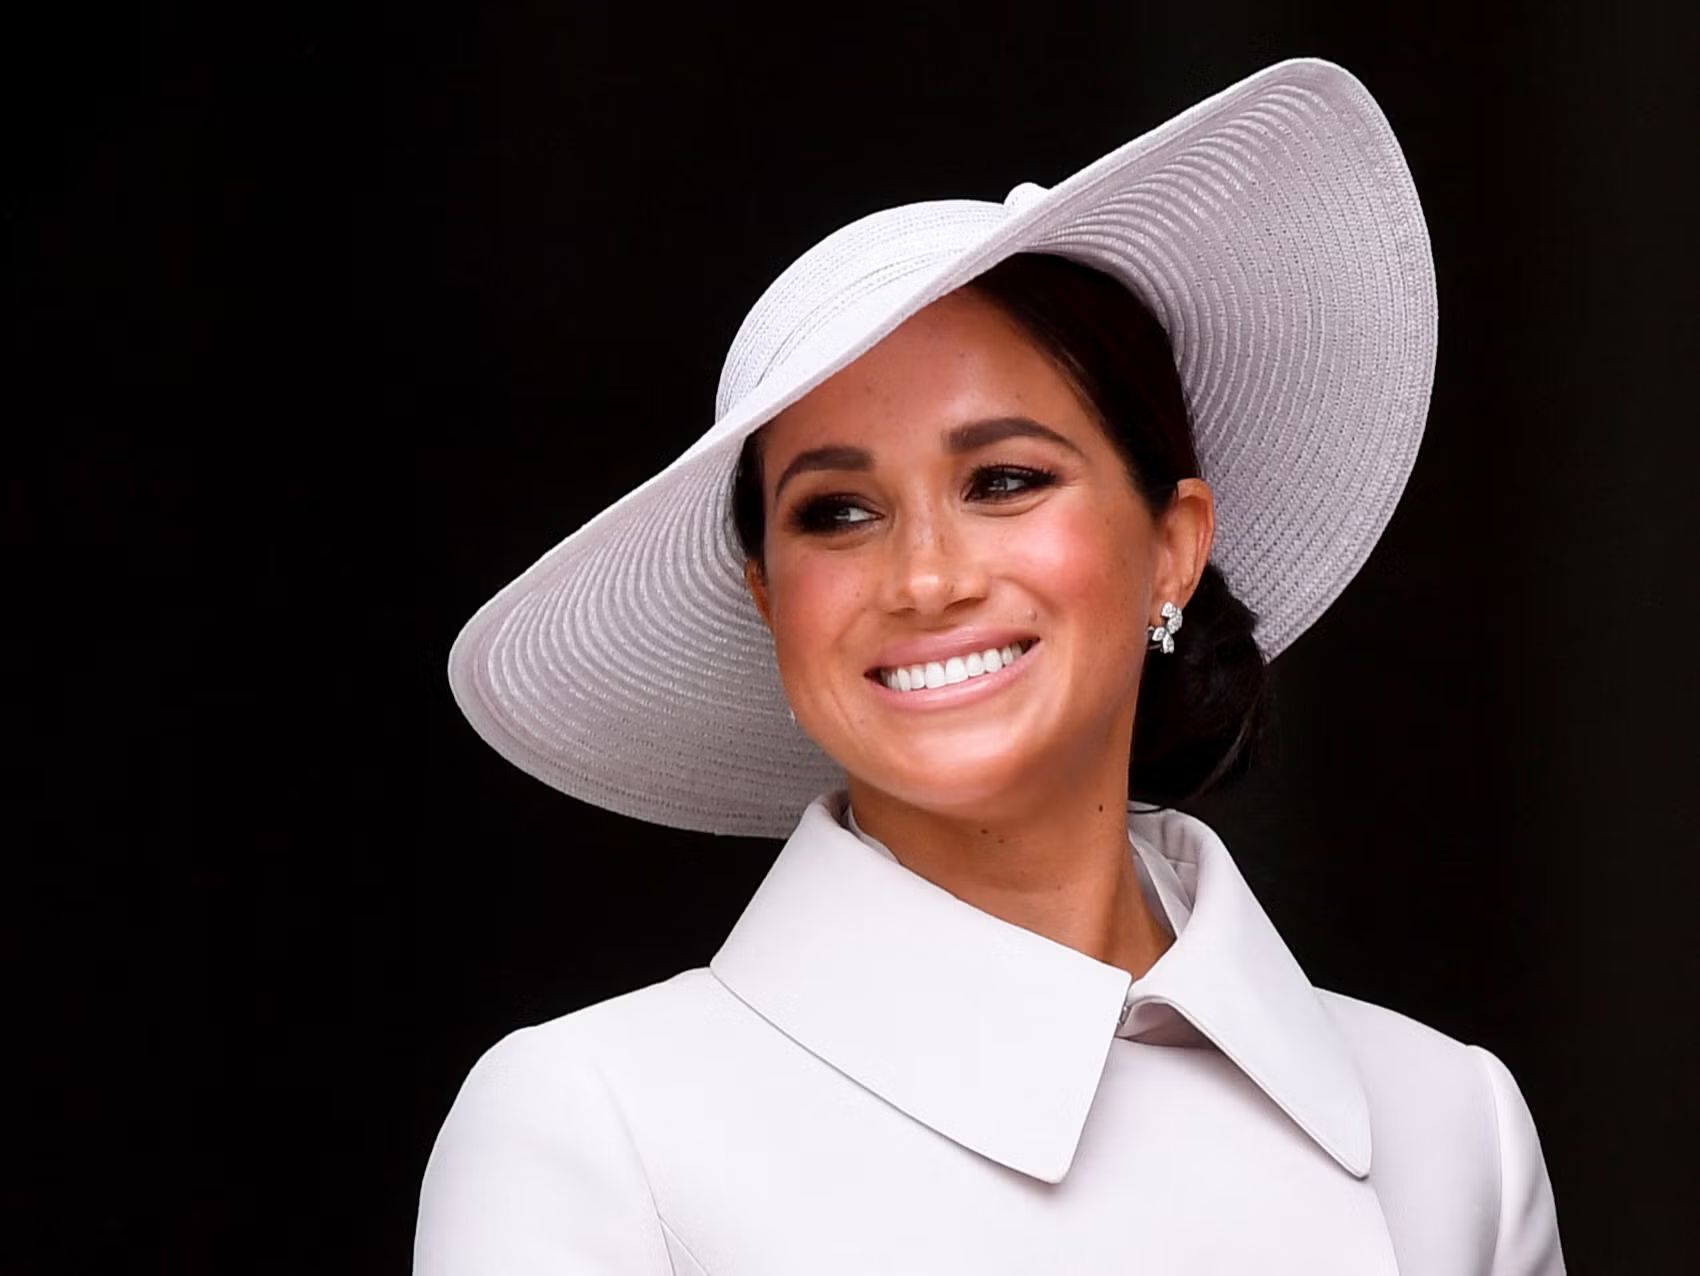 Meghan Markle Senate Speculation: Is She Next In Line For Feinstein’s Seat?